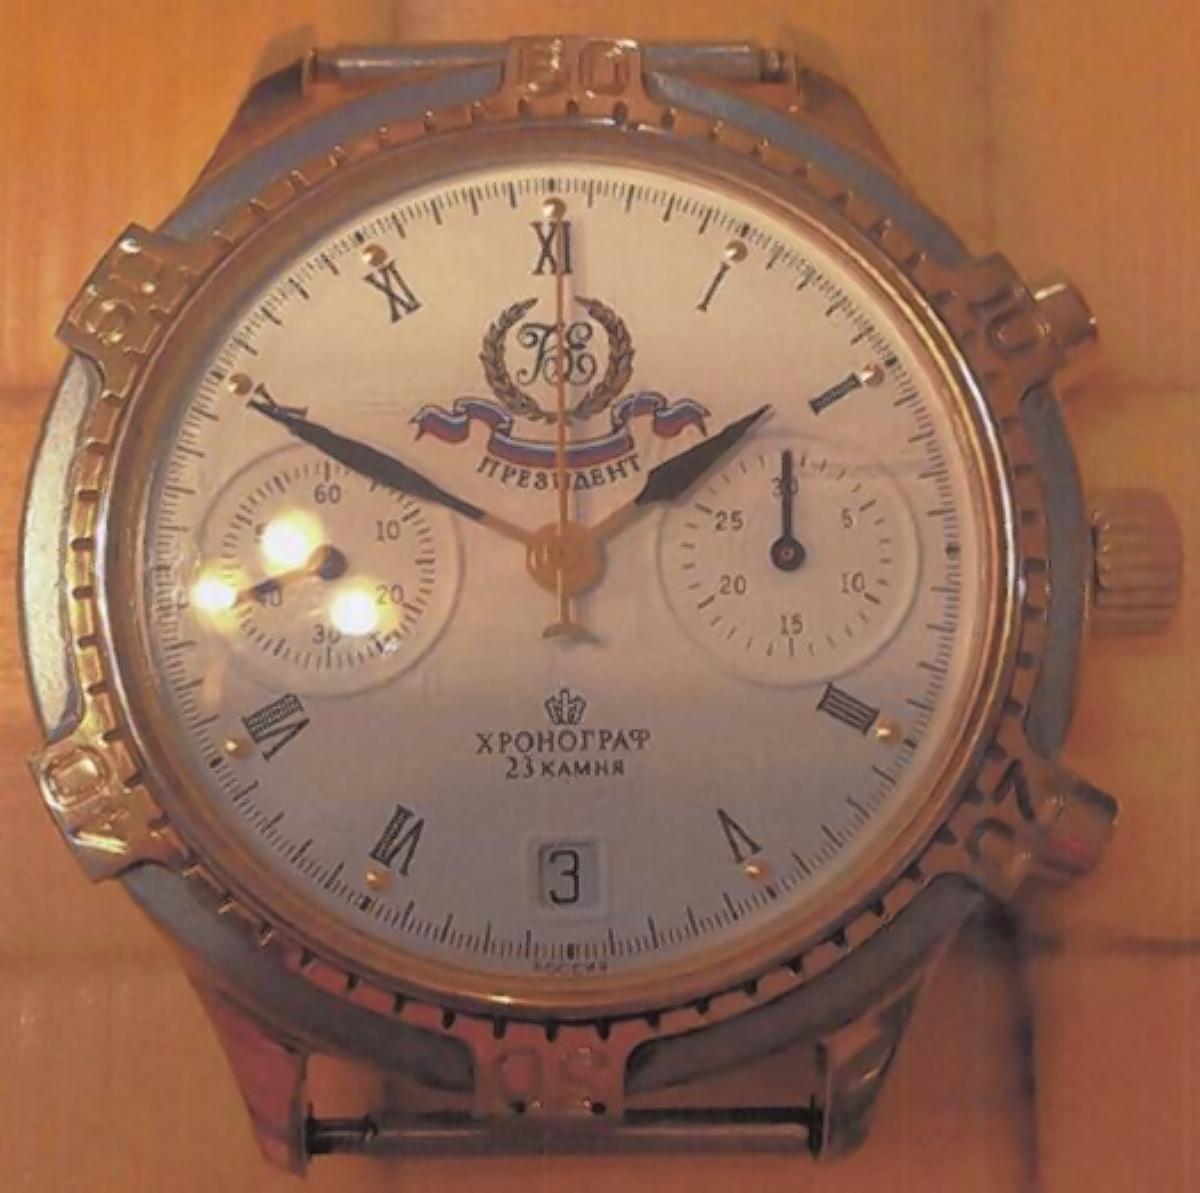 Police reunite Rolex watch signed by Russian president to owner | Watford Observer